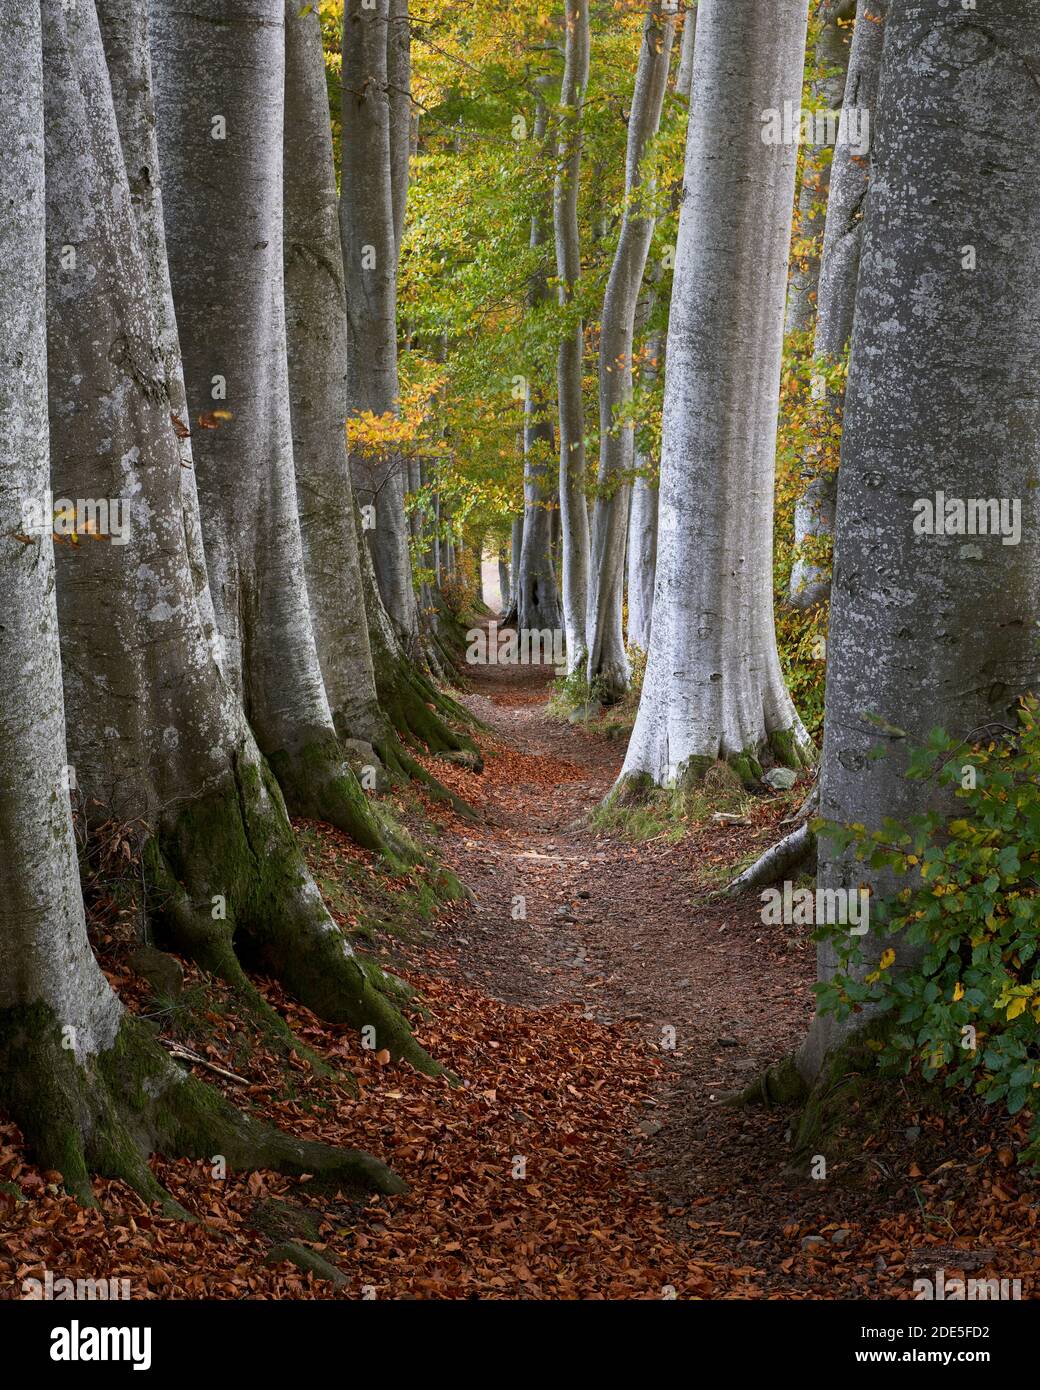 Beech trees and path, near Tarland, Aberdeenshire, Scotland.  Known locally as the 'double beeches' these trees are unusual shelter belts. Stock Photo